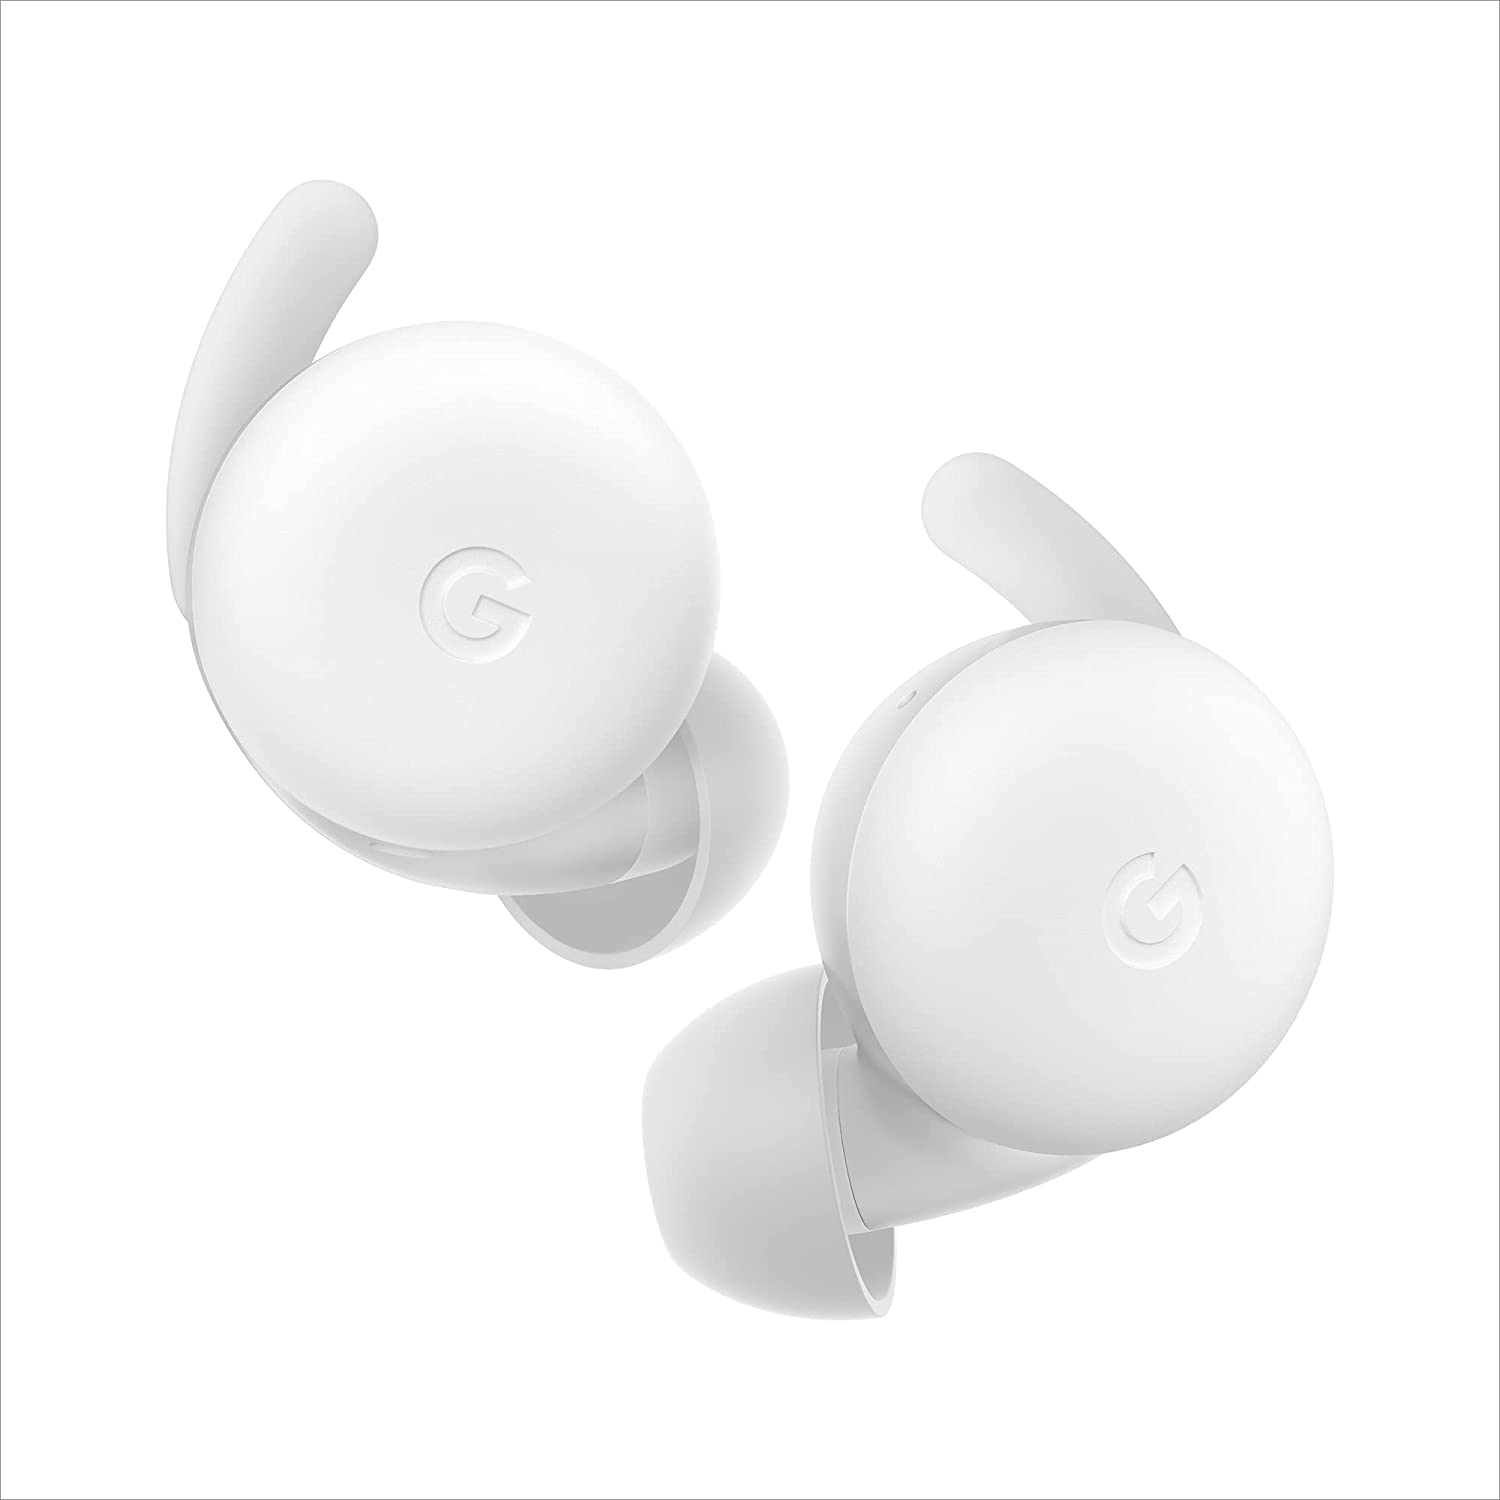 Google Pixel Buds A-Series In-Ear Wireless Earbuds - White - Refurbished Good